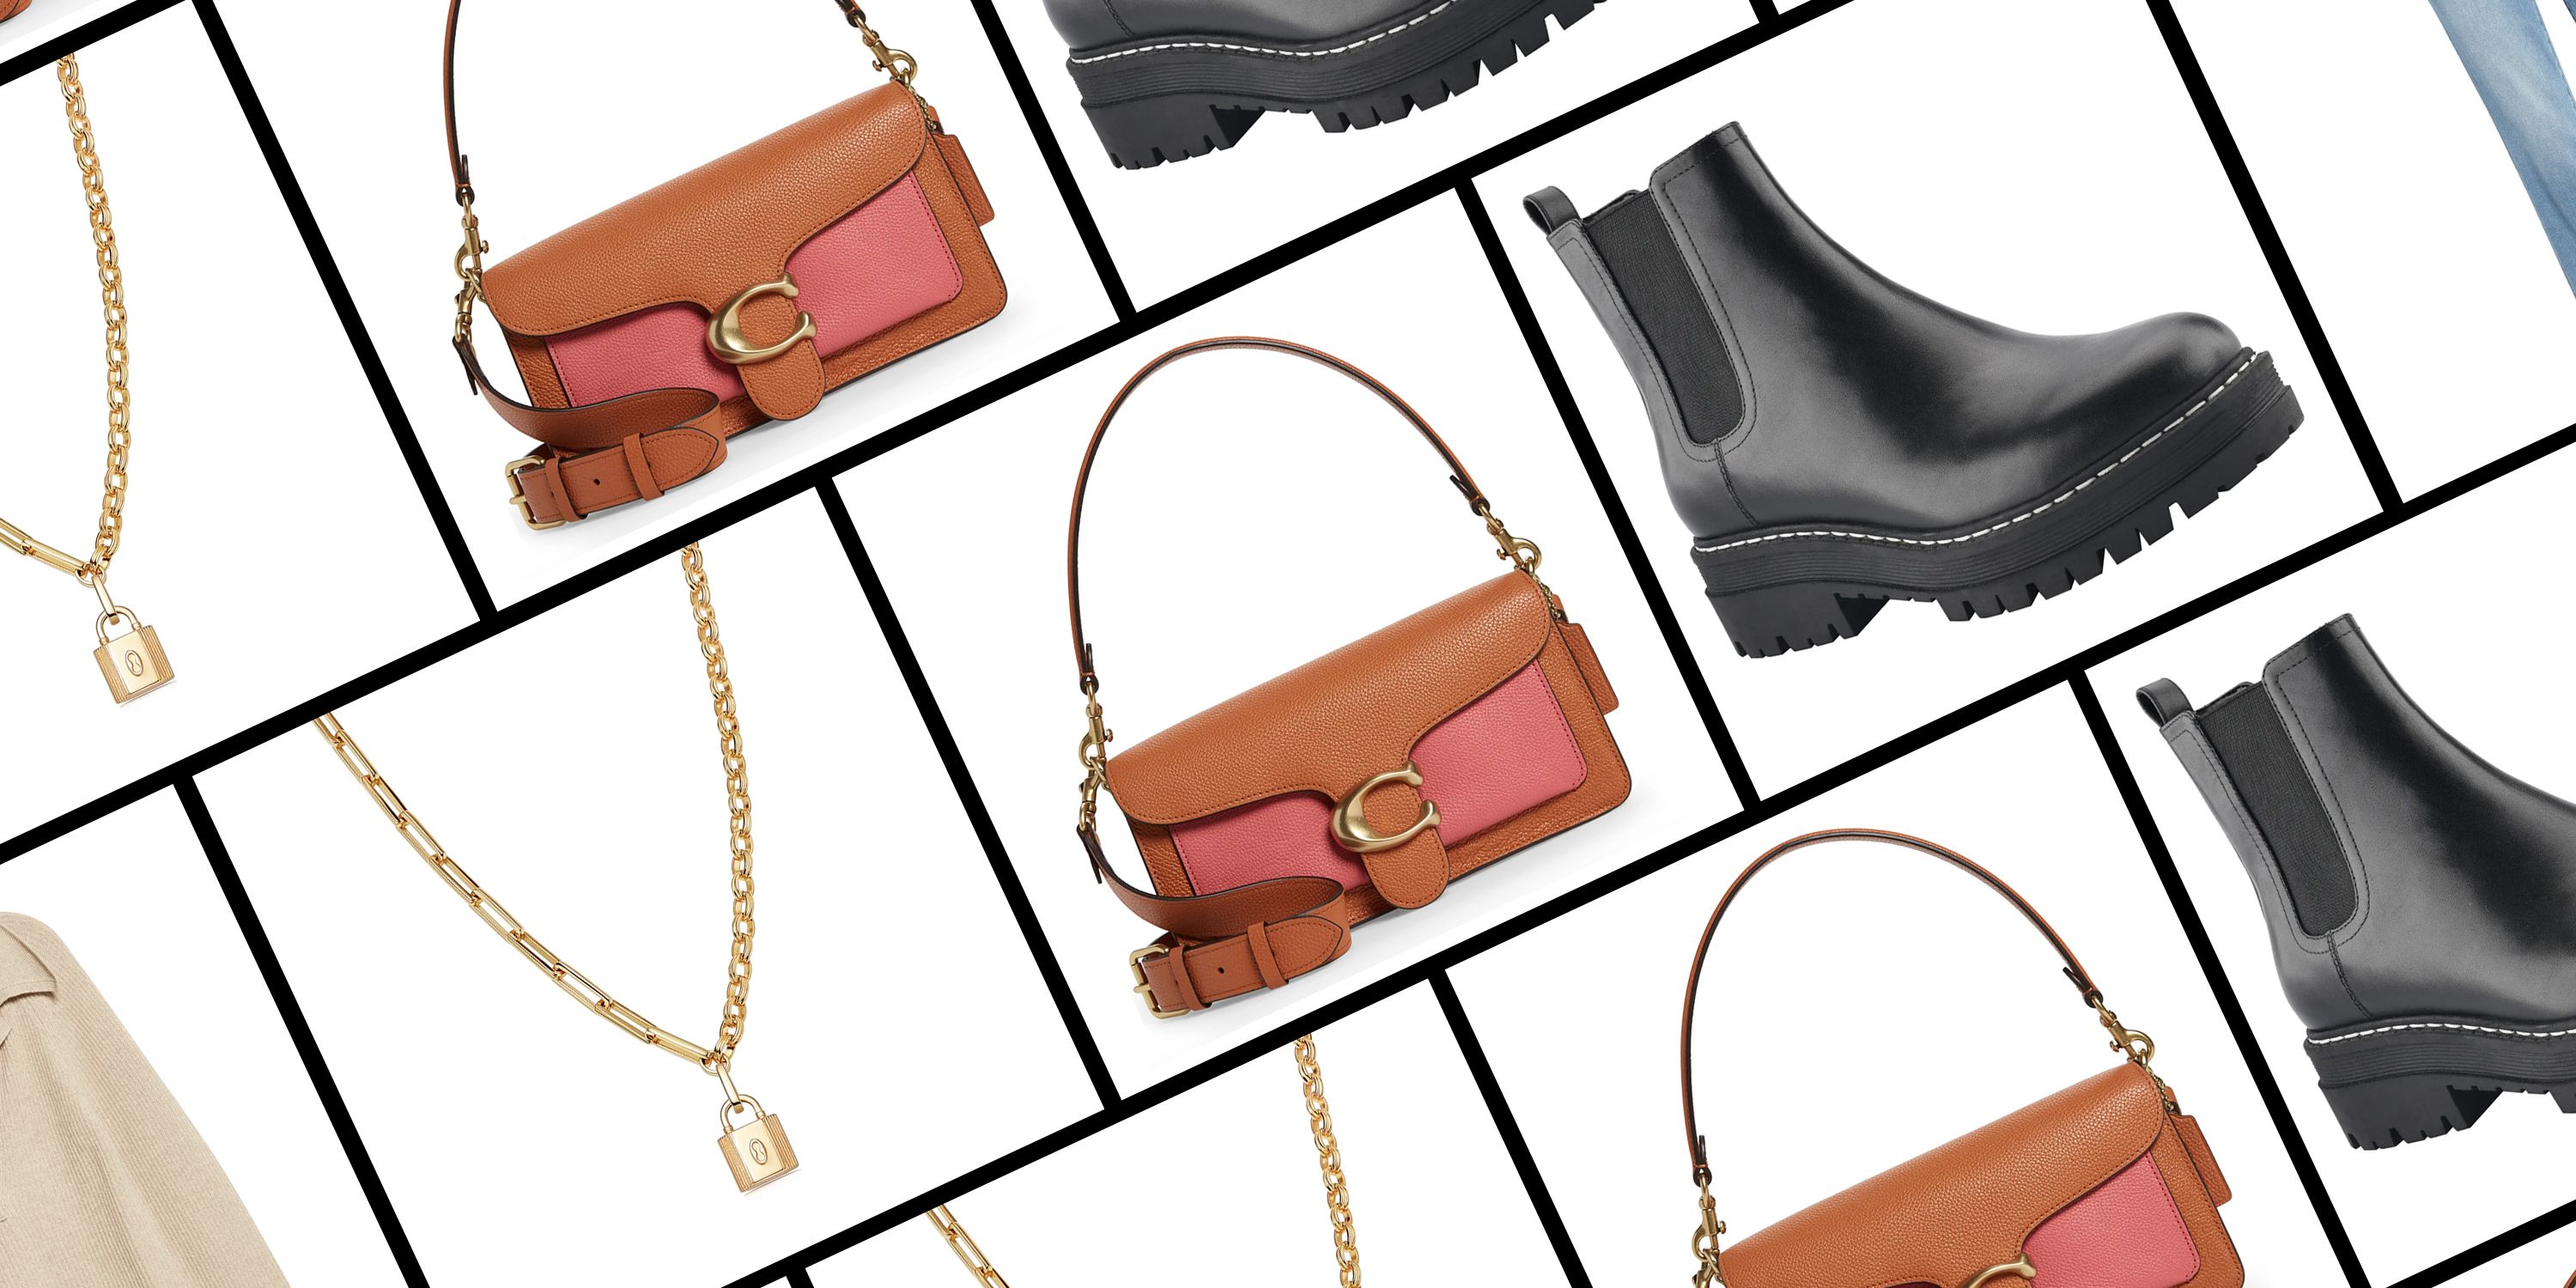 Shop Celeb-Approved Clare V. Handbags at the Nordstrom Anniversary Sale